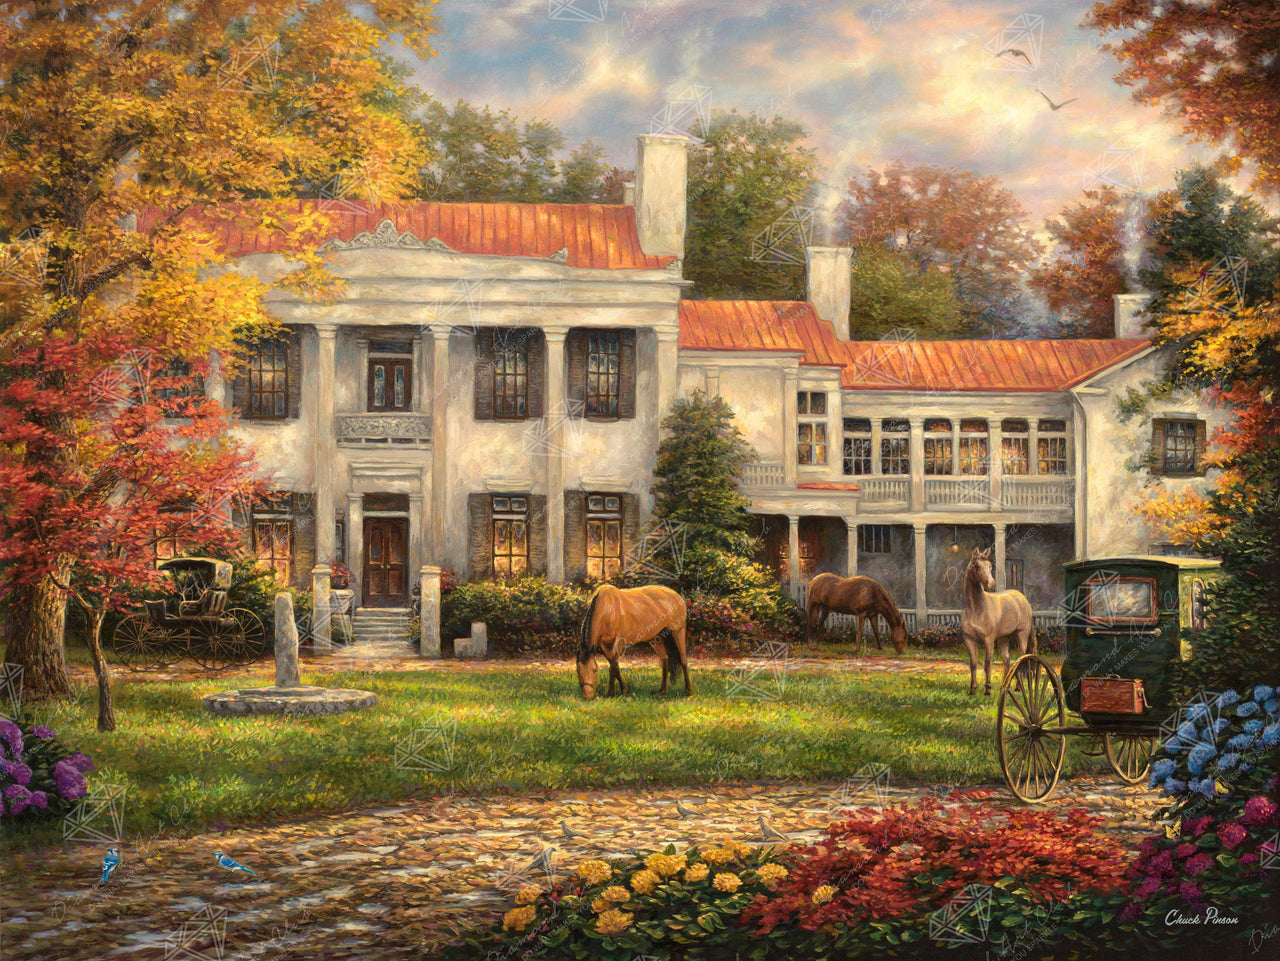 Diamond Painting Autumn Afternoon at Belle Meade 36.6" x 27.6" (93cm x 70cm) / Square With 57 Colors Including 3 ABs / 102,210